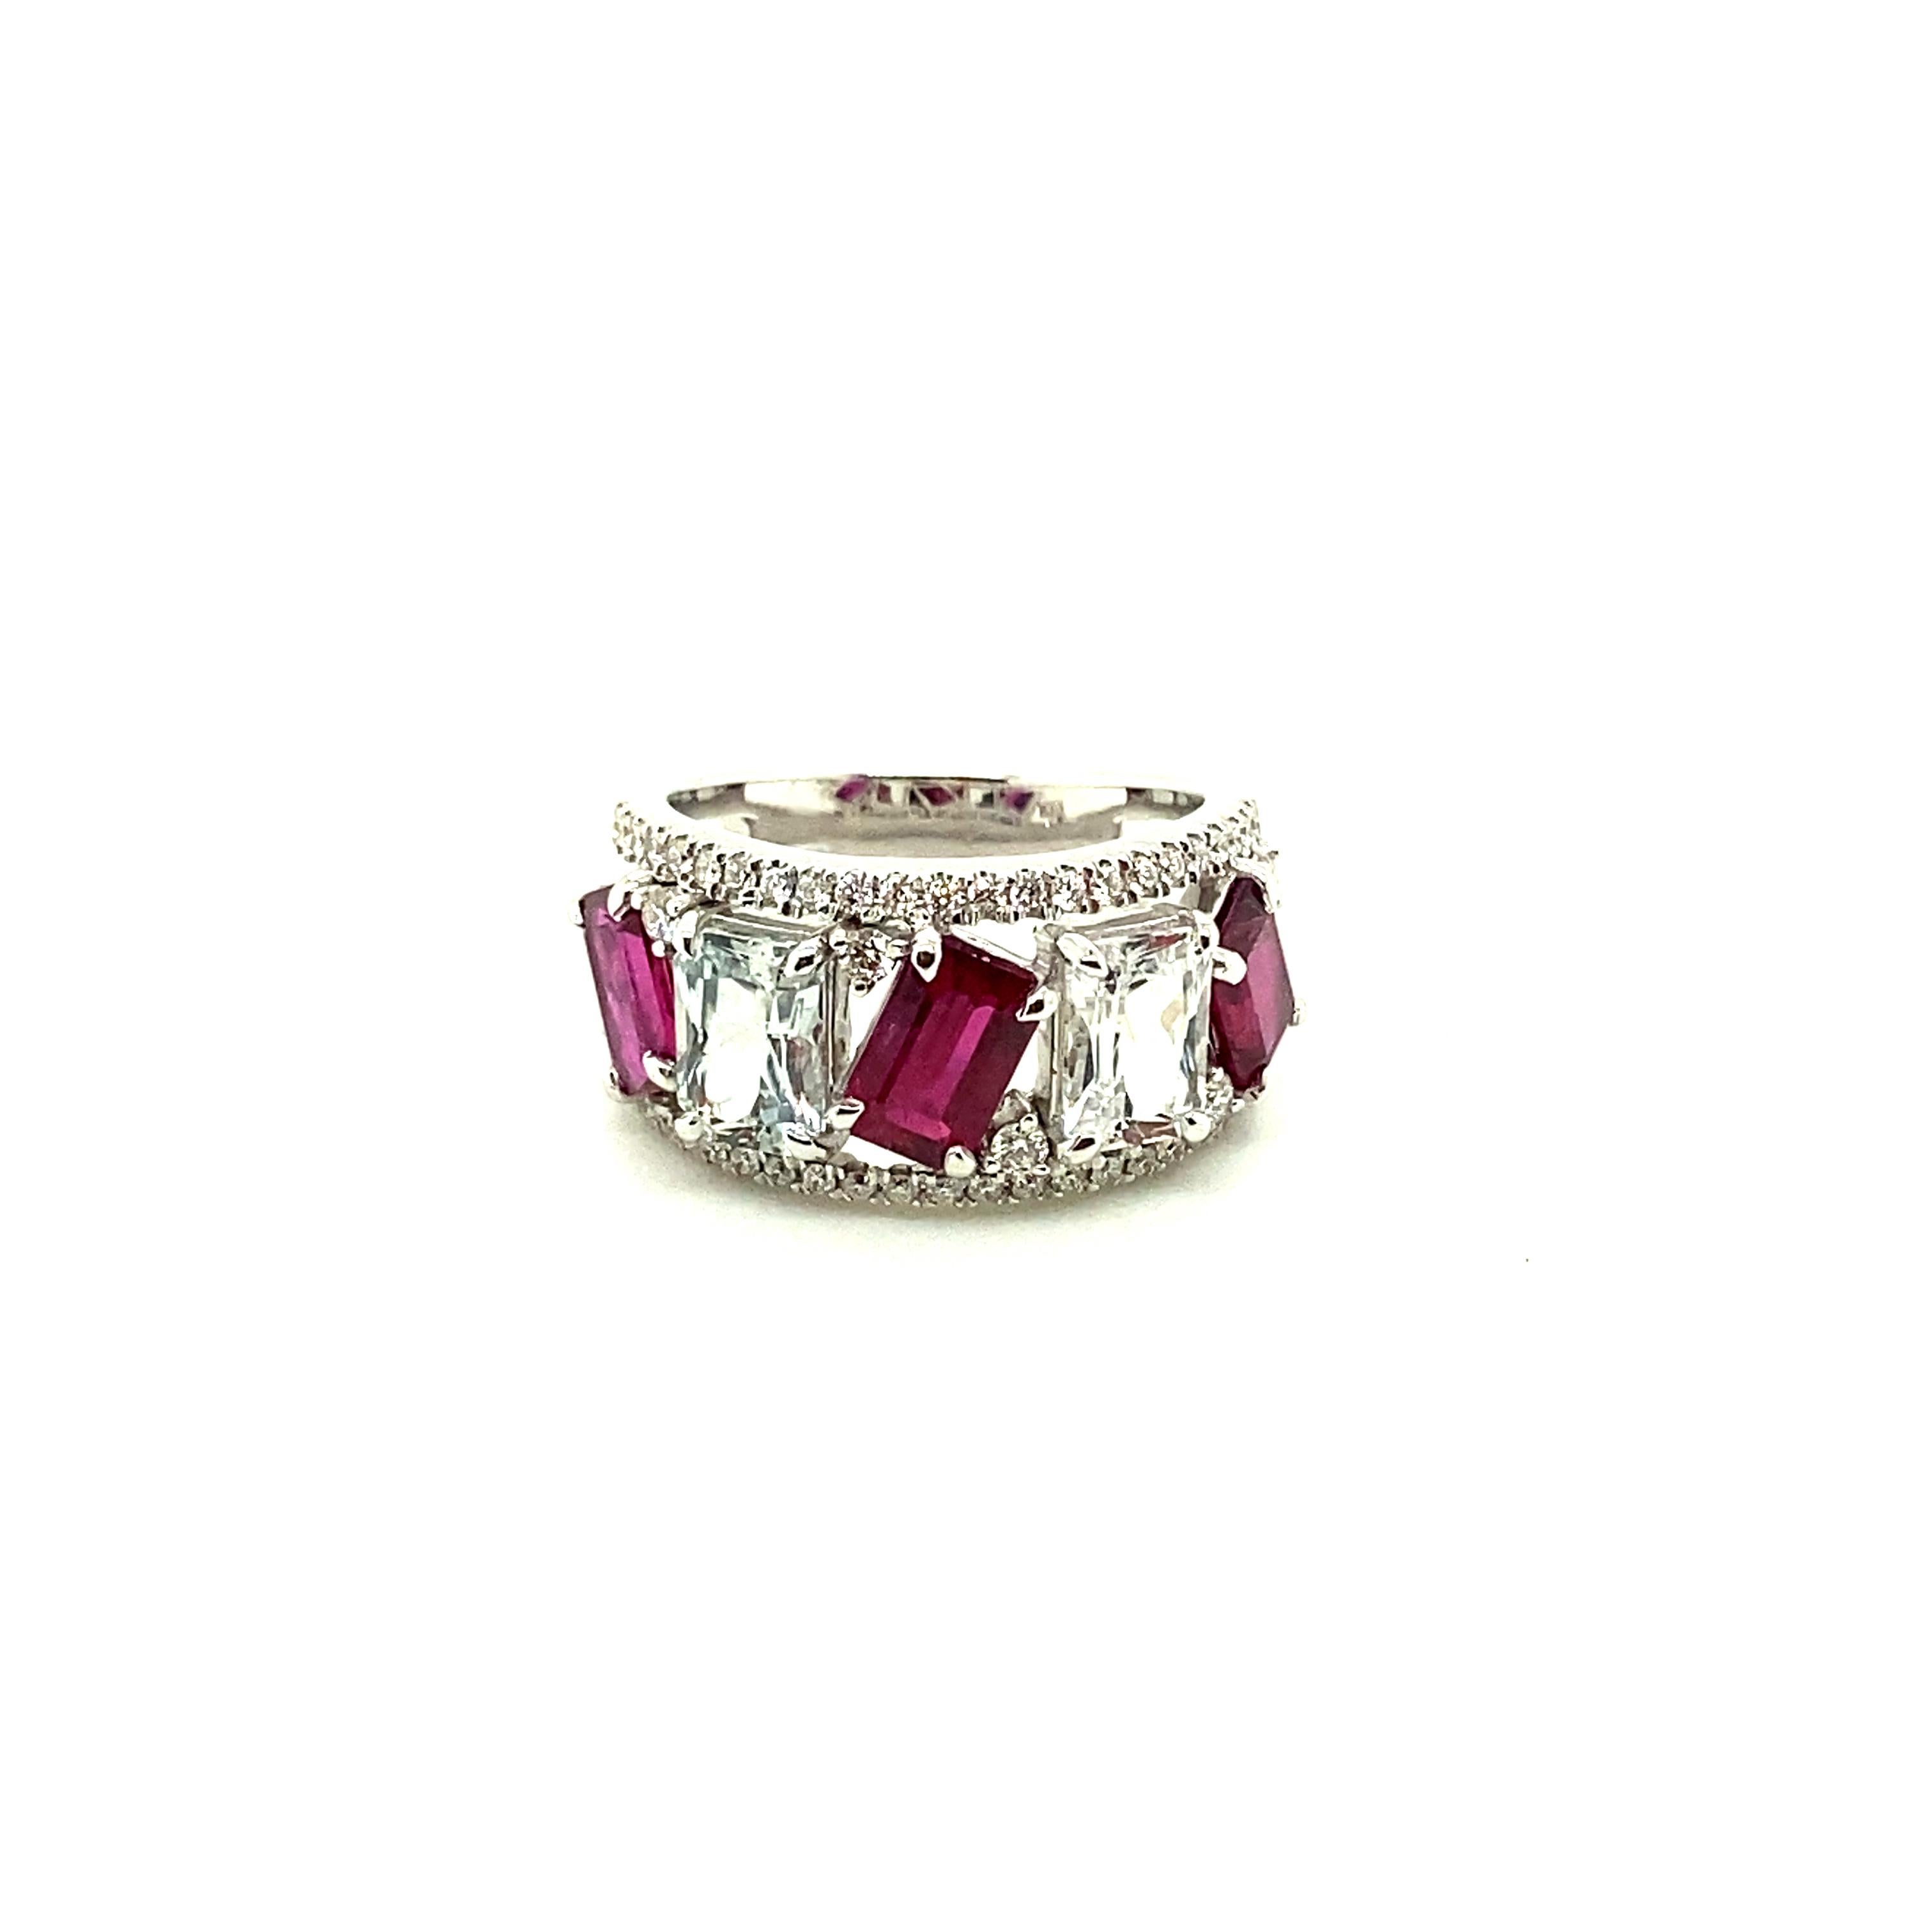 Vivid Red Ruby and White Sapphire Diamond Gold Ring:

A beautiful ring, it features three emerald-cut vivid red rubies weighing 2.45 carat alternating with two white sapphires weighing 2.23 carat, surrounded by a flurry of white diamonds weighing